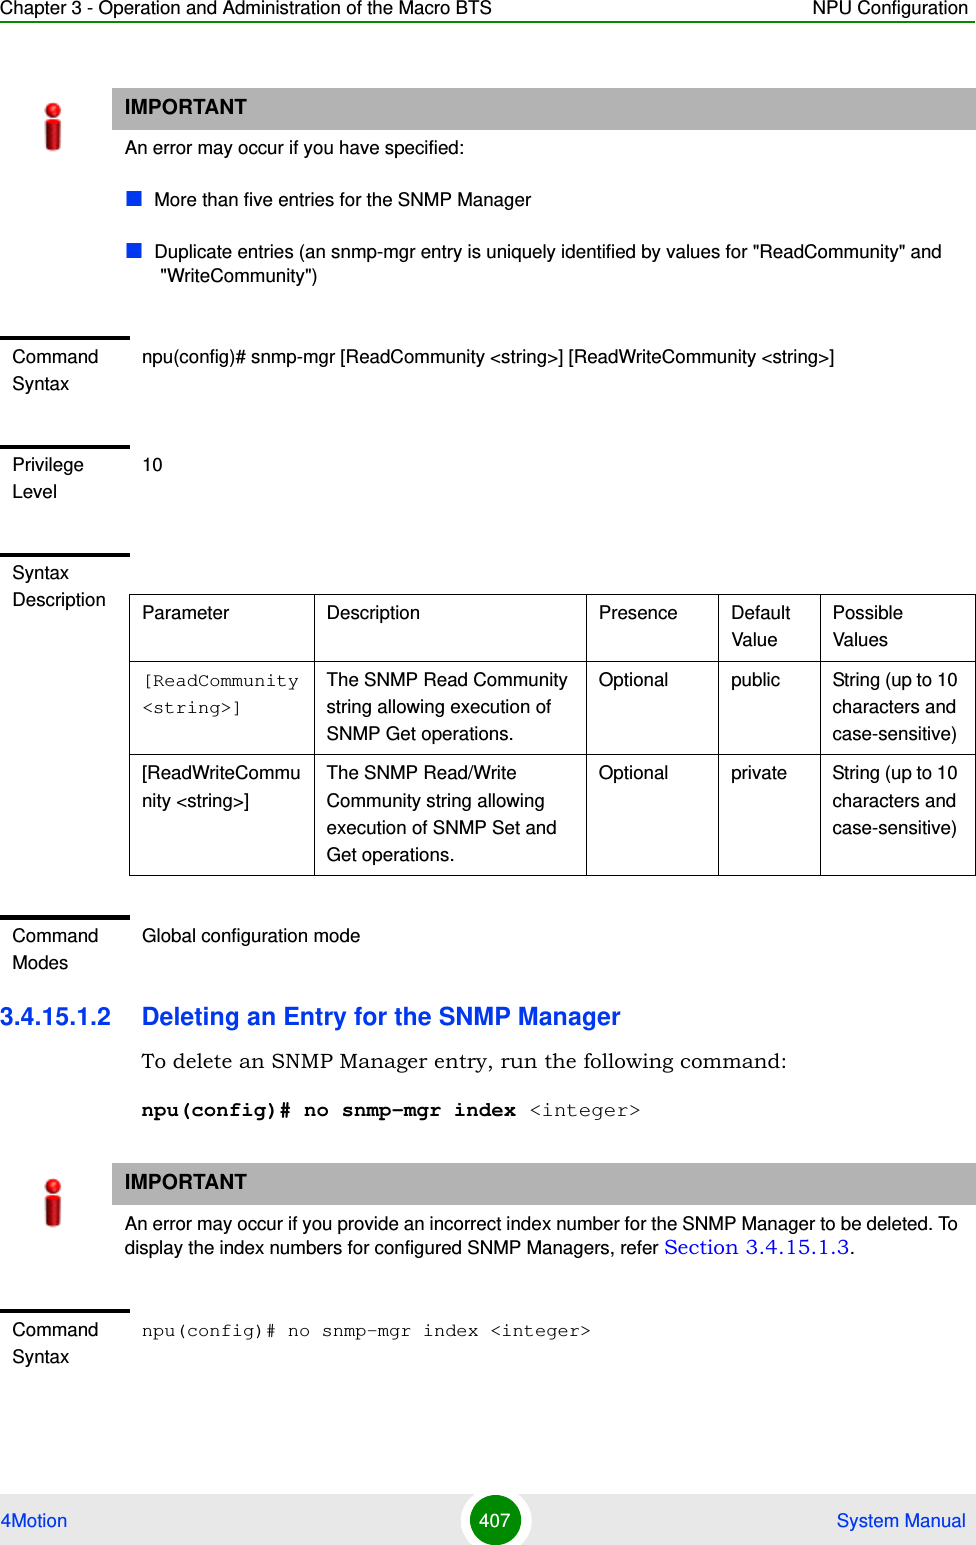 Chapter 3 - Operation and Administration of the Macro BTS NPU Configuration4Motion 407  System Manual3.4.15.1.2 Deleting an Entry for the SNMP ManagerTo delete an SNMP Manager entry, run the following command:npu(config)# no snmp-mgr index &lt;integer&gt;IMPORTANTAn error may occur if you have specified:More than five entries for the SNMP Manager Duplicate entries (an snmp-mgr entry is uniquely identified by values for &quot;ReadCommunity&quot; and &quot;WriteCommunity&quot;)Command Syntaxnpu(config)# snmp-mgr [ReadCommunity &lt;string&gt;] [ReadWriteCommunity &lt;string&gt;]Privilege Level10Syntax Description Parameter Description Presence Default ValuePossible Values[ReadCommunity &lt;string&gt;]The SNMP Read Community string allowing execution of SNMP Get operations.Optional public String (up to 10 characters and case-sensitive)[ReadWriteCommunity &lt;string&gt;]The SNMP Read/Write Community string allowing execution of SNMP Set and Get operations.Optional private String (up to 10 characters and case-sensitive)Command ModesGlobal configuration modeIMPORTANTAn error may occur if you provide an incorrect index number for the SNMP Manager to be deleted. To display the index numbers for configured SNMP Managers, refer Section 3.4.15.1.3.Command Syntaxnpu(config)# no snmp-mgr index &lt;integer&gt;